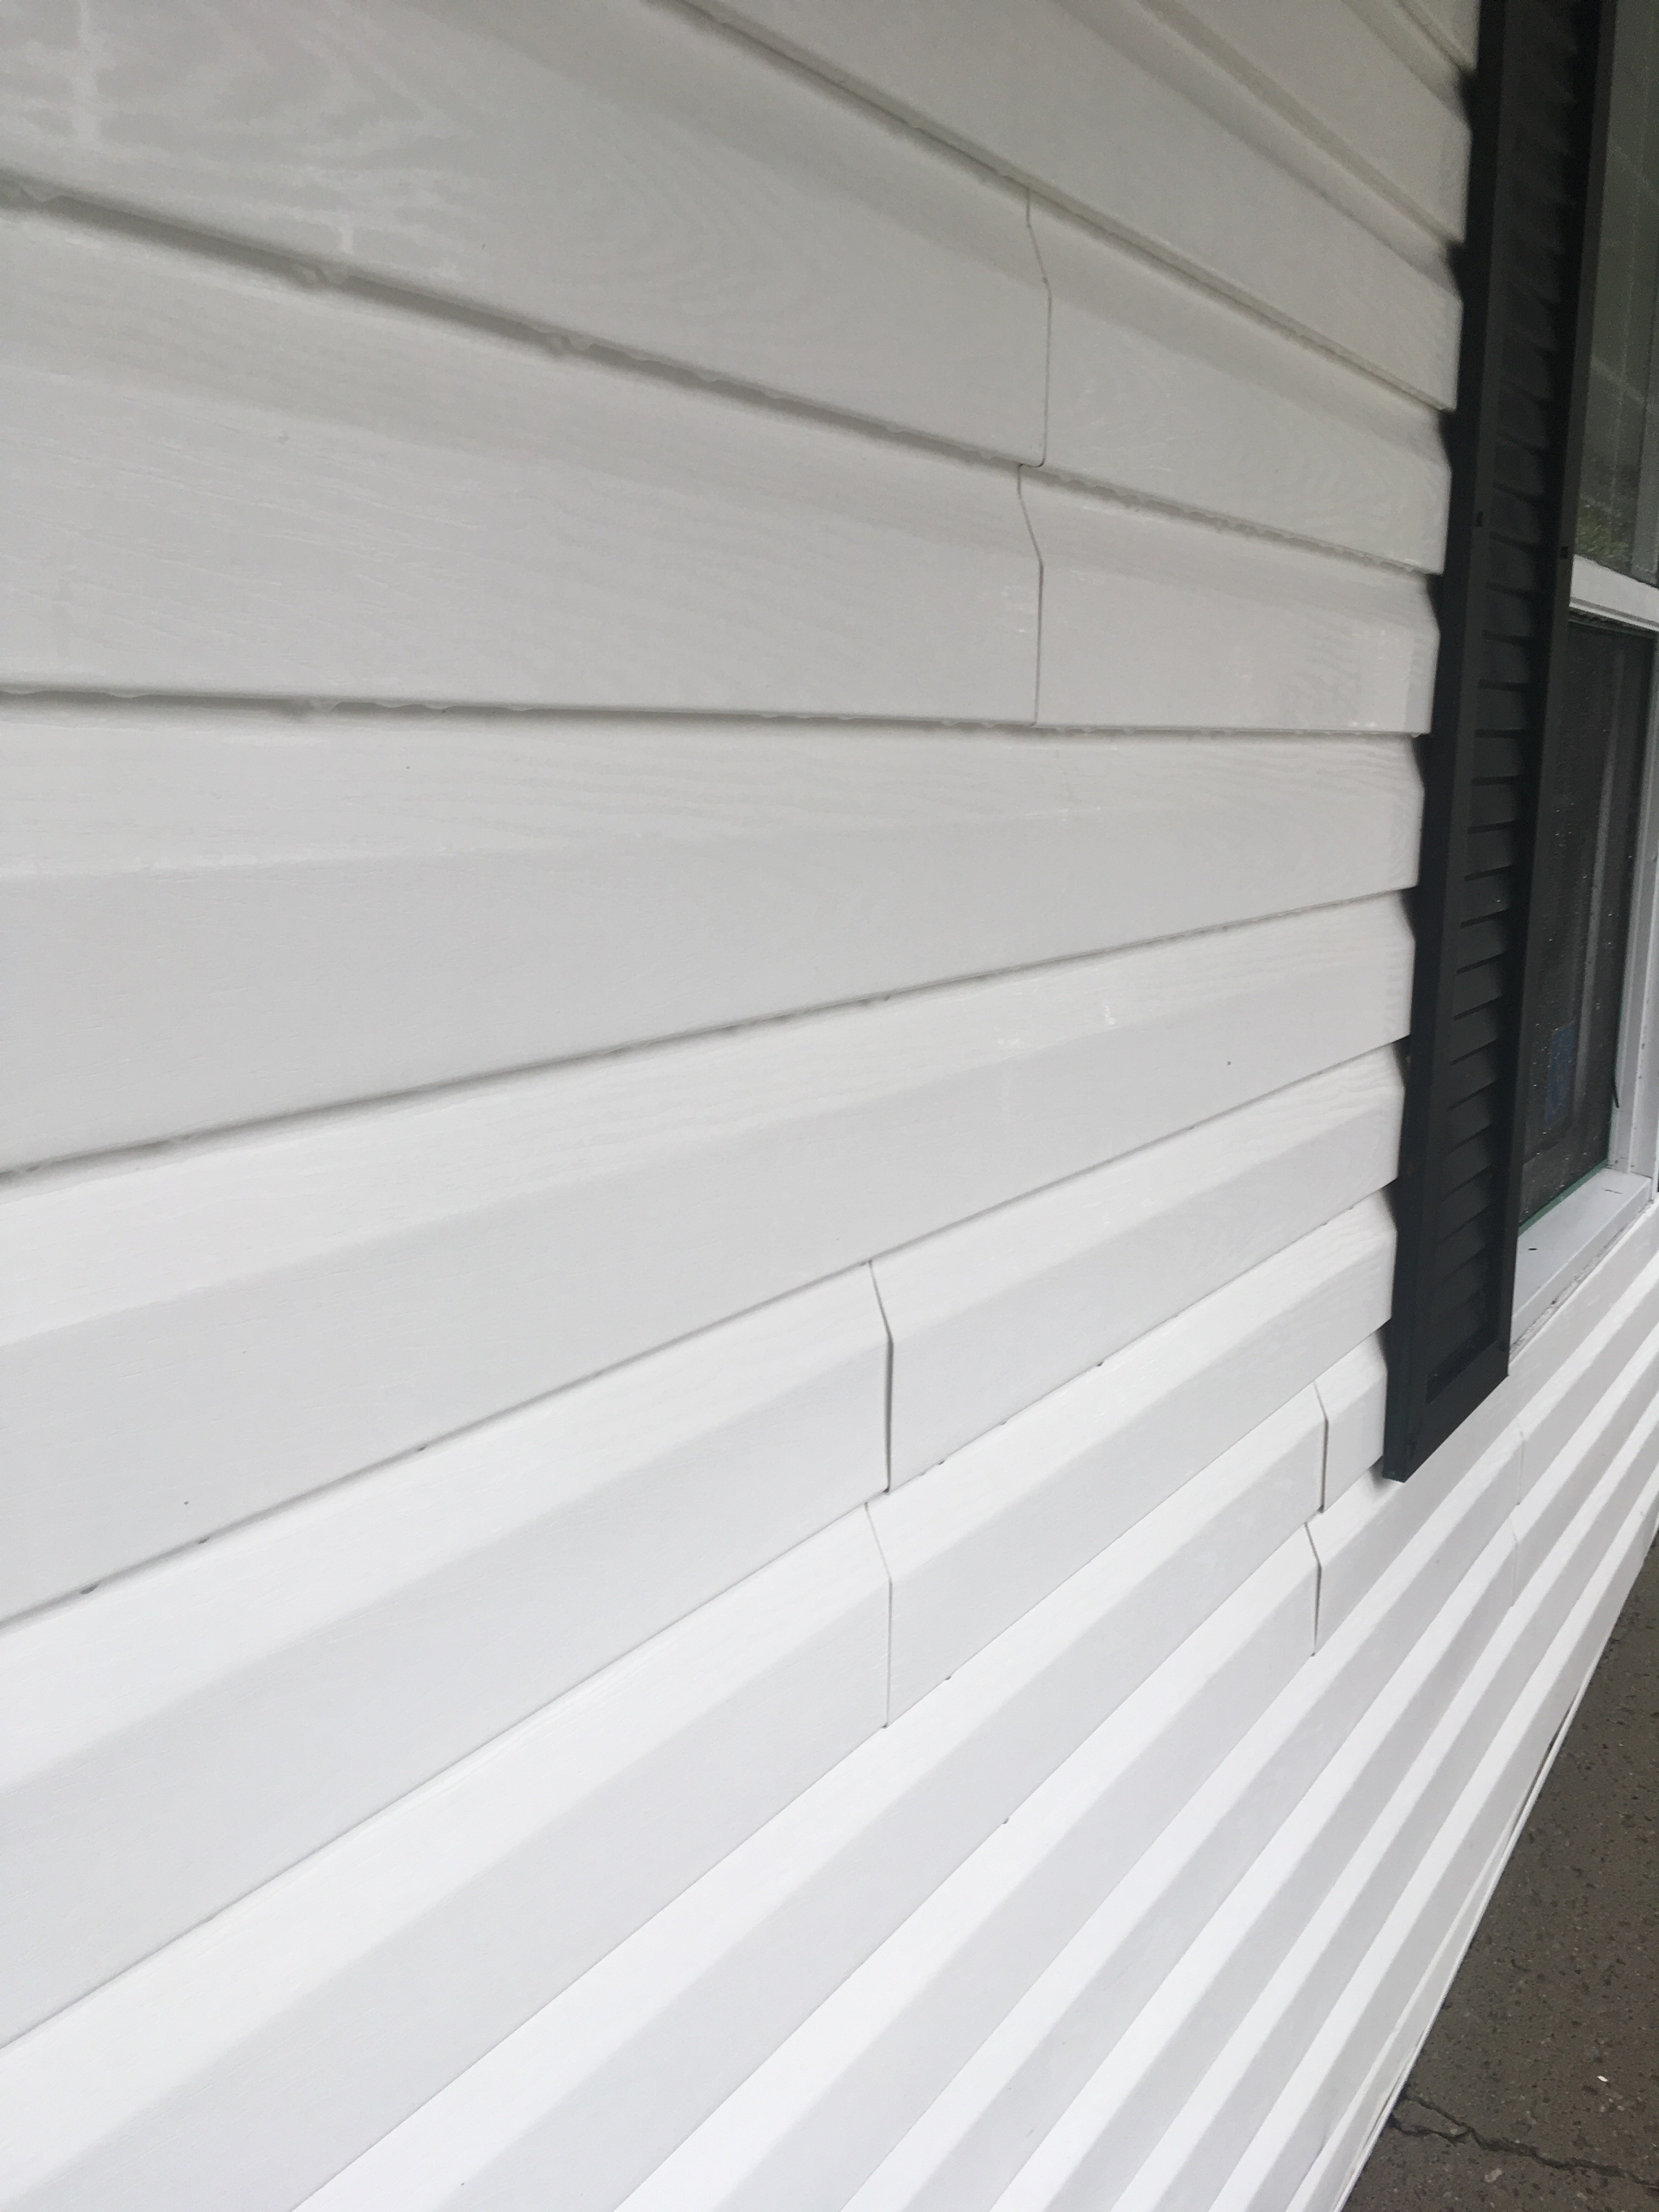 How to clean vinyl siding pressure washing in whitby